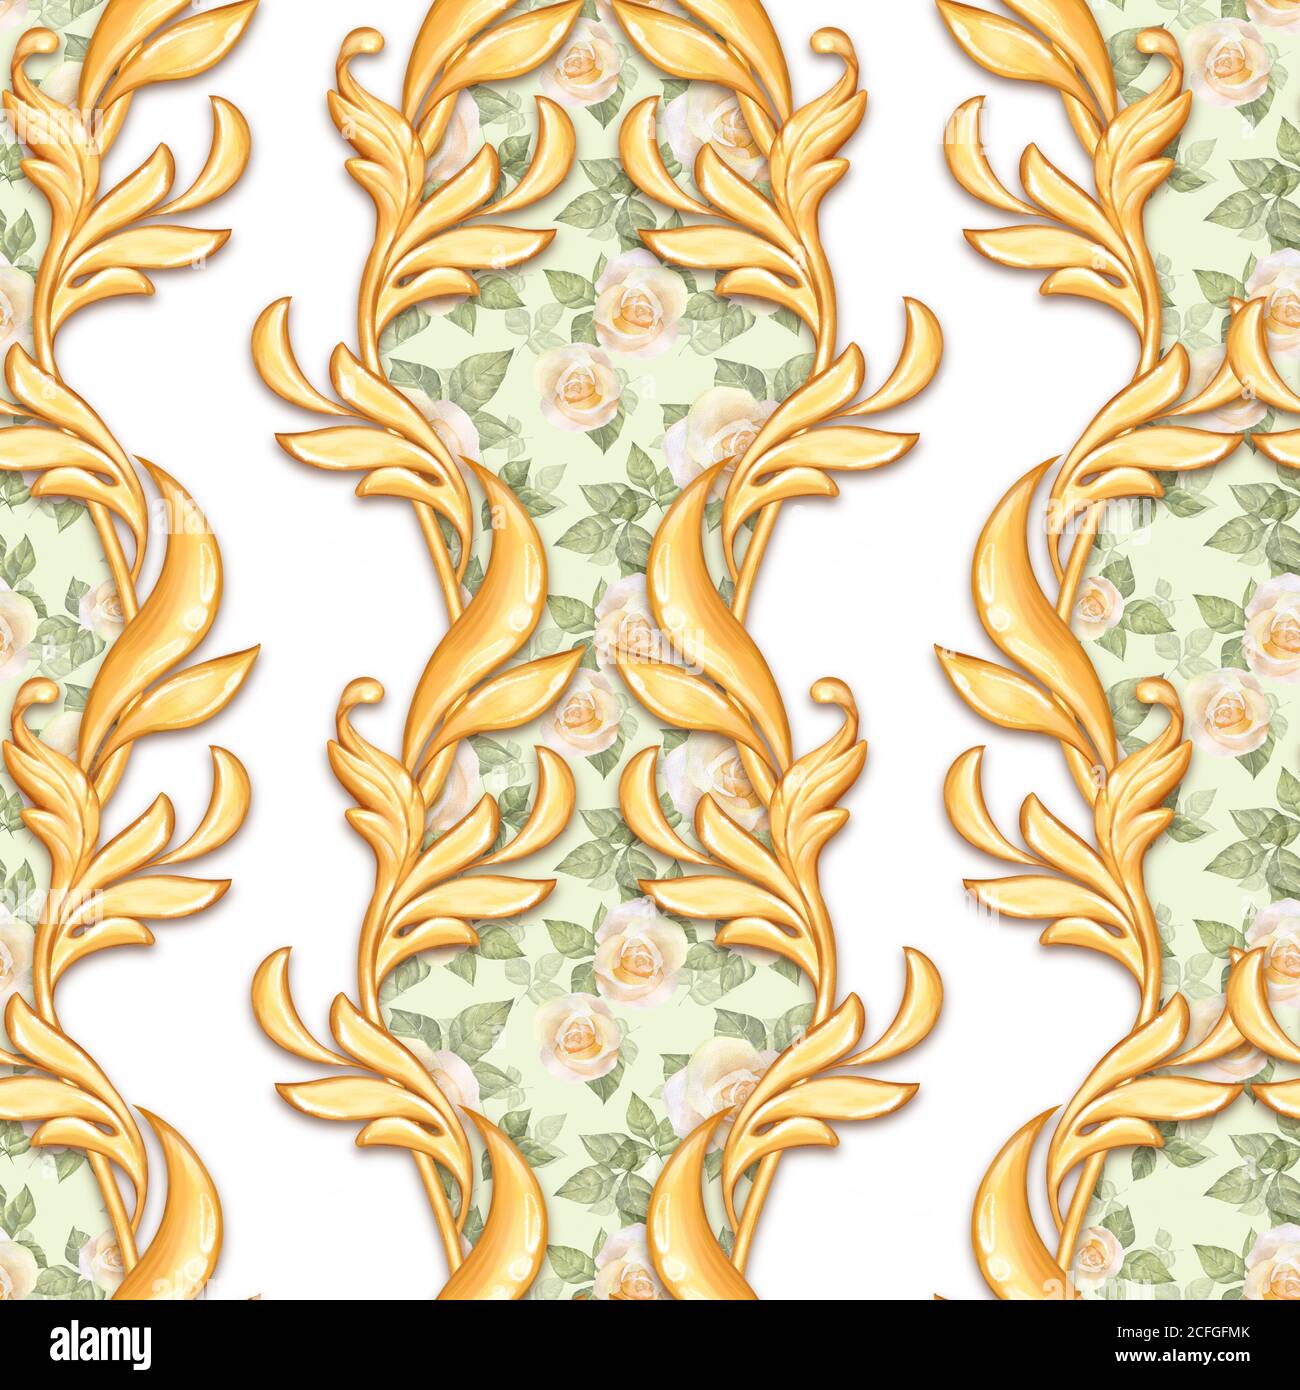 Seamless baroque pattern with roses and golden scrolls Stock Photo